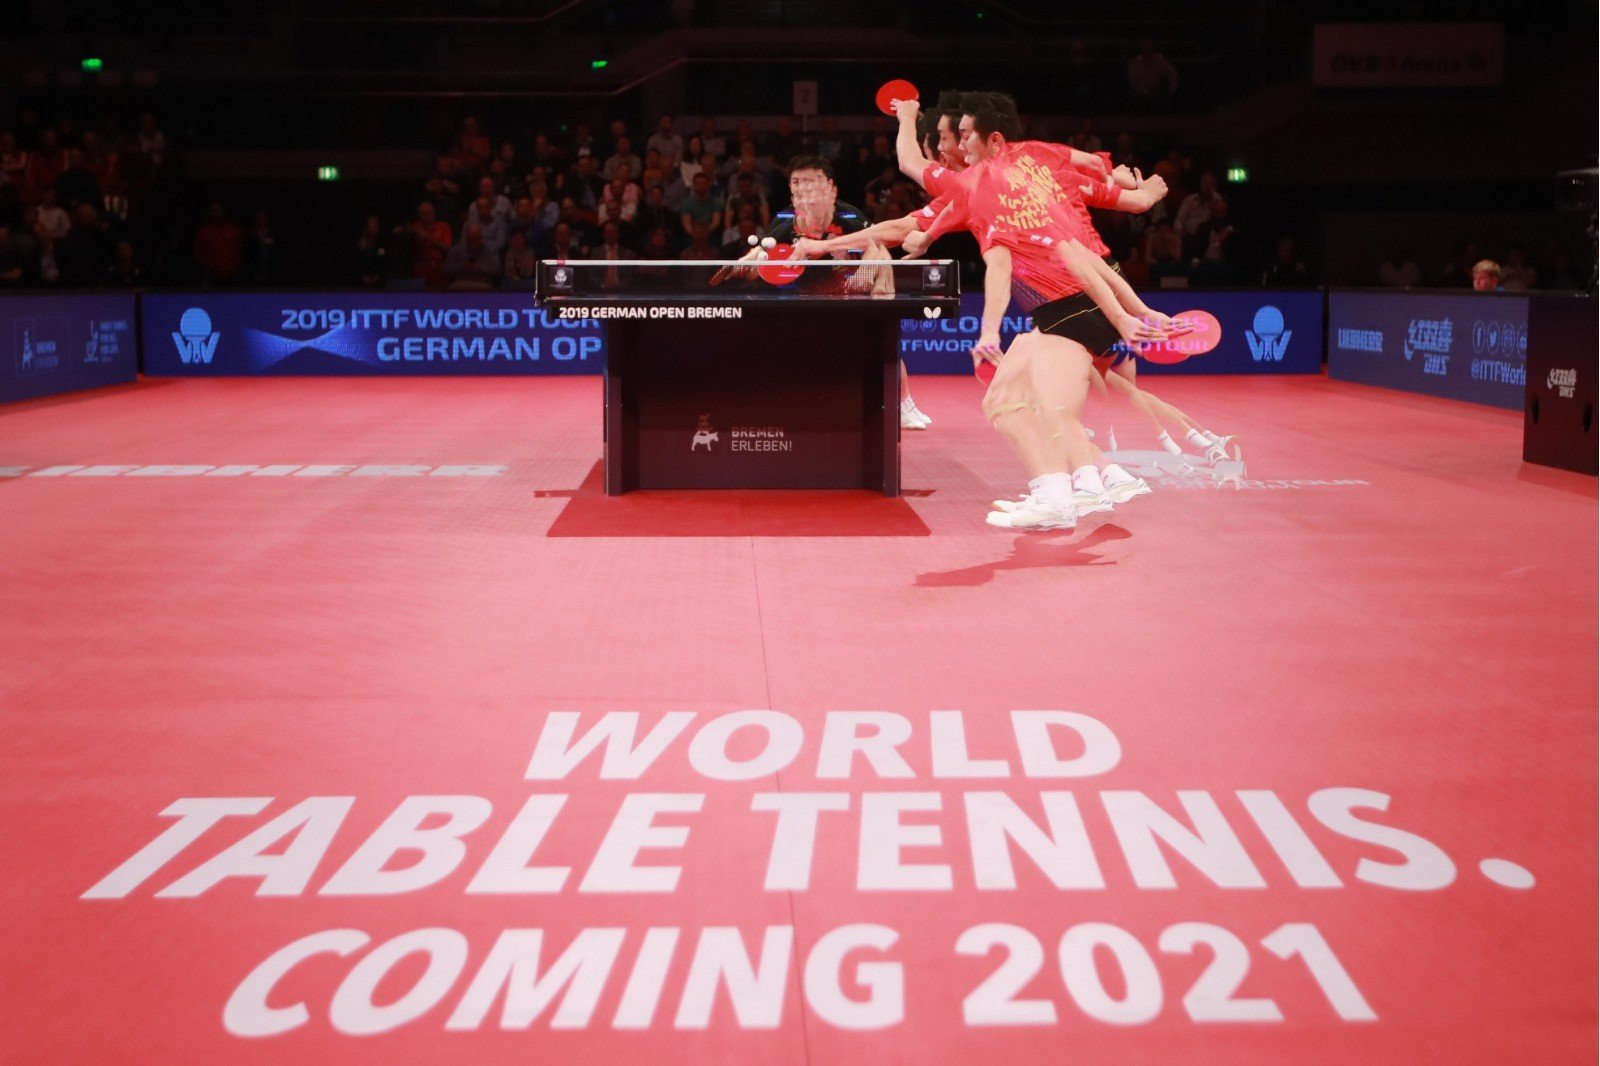 Bidding for World Table Tennis tournaments in 2021 is still ongoing ©Getty Images